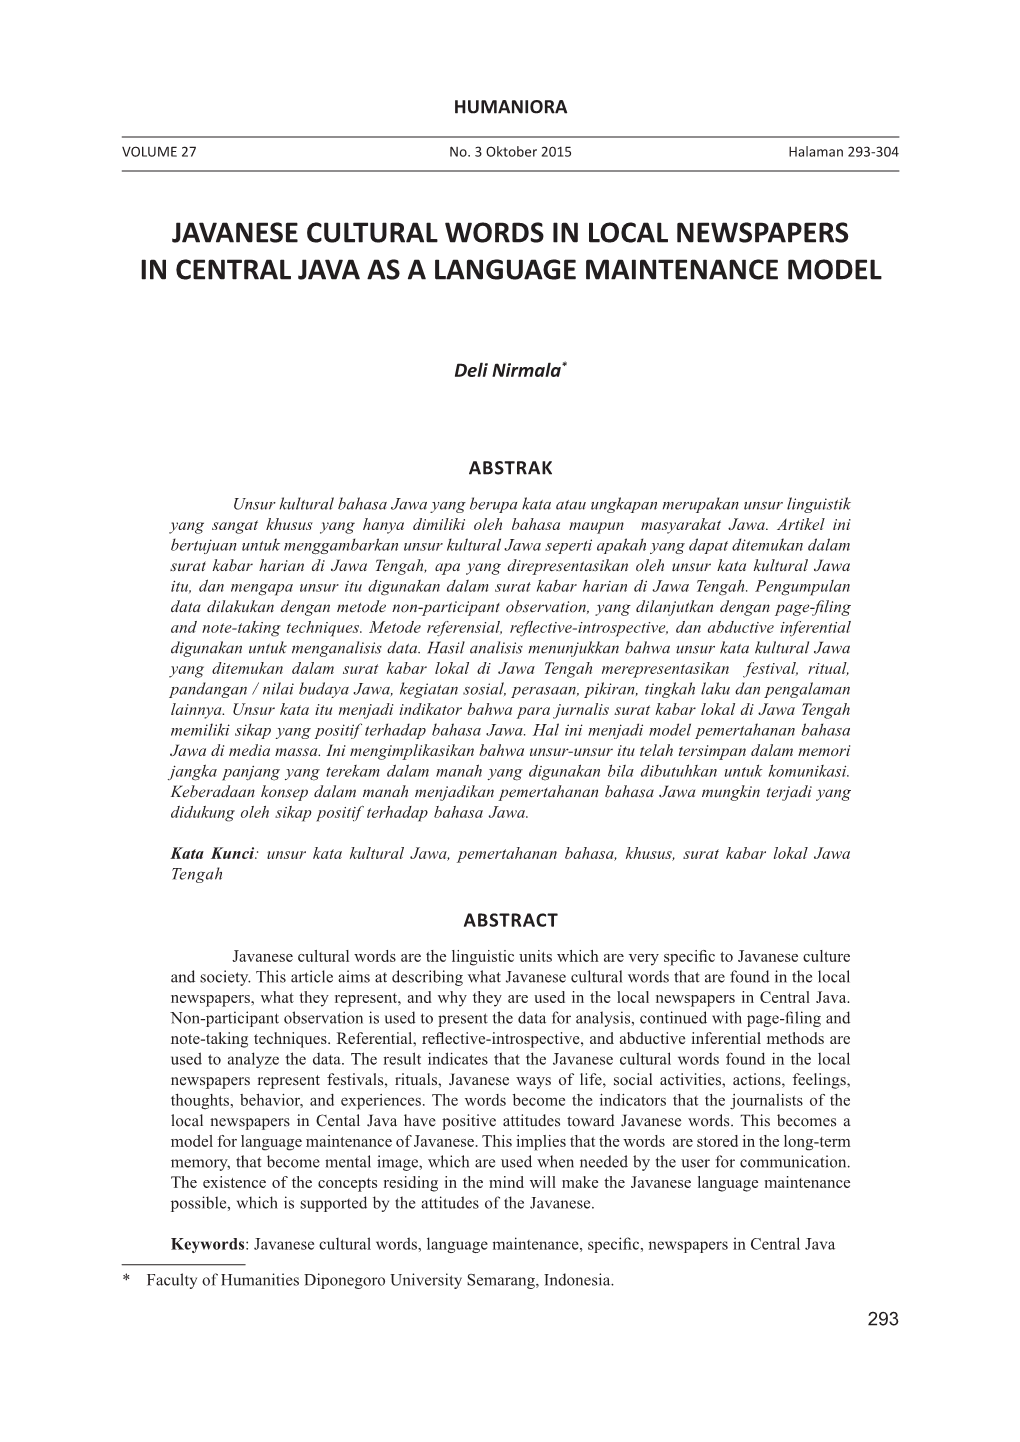 Javanese Cultural Words in Local Newspapers in Central Java As a Language Maintenance Model